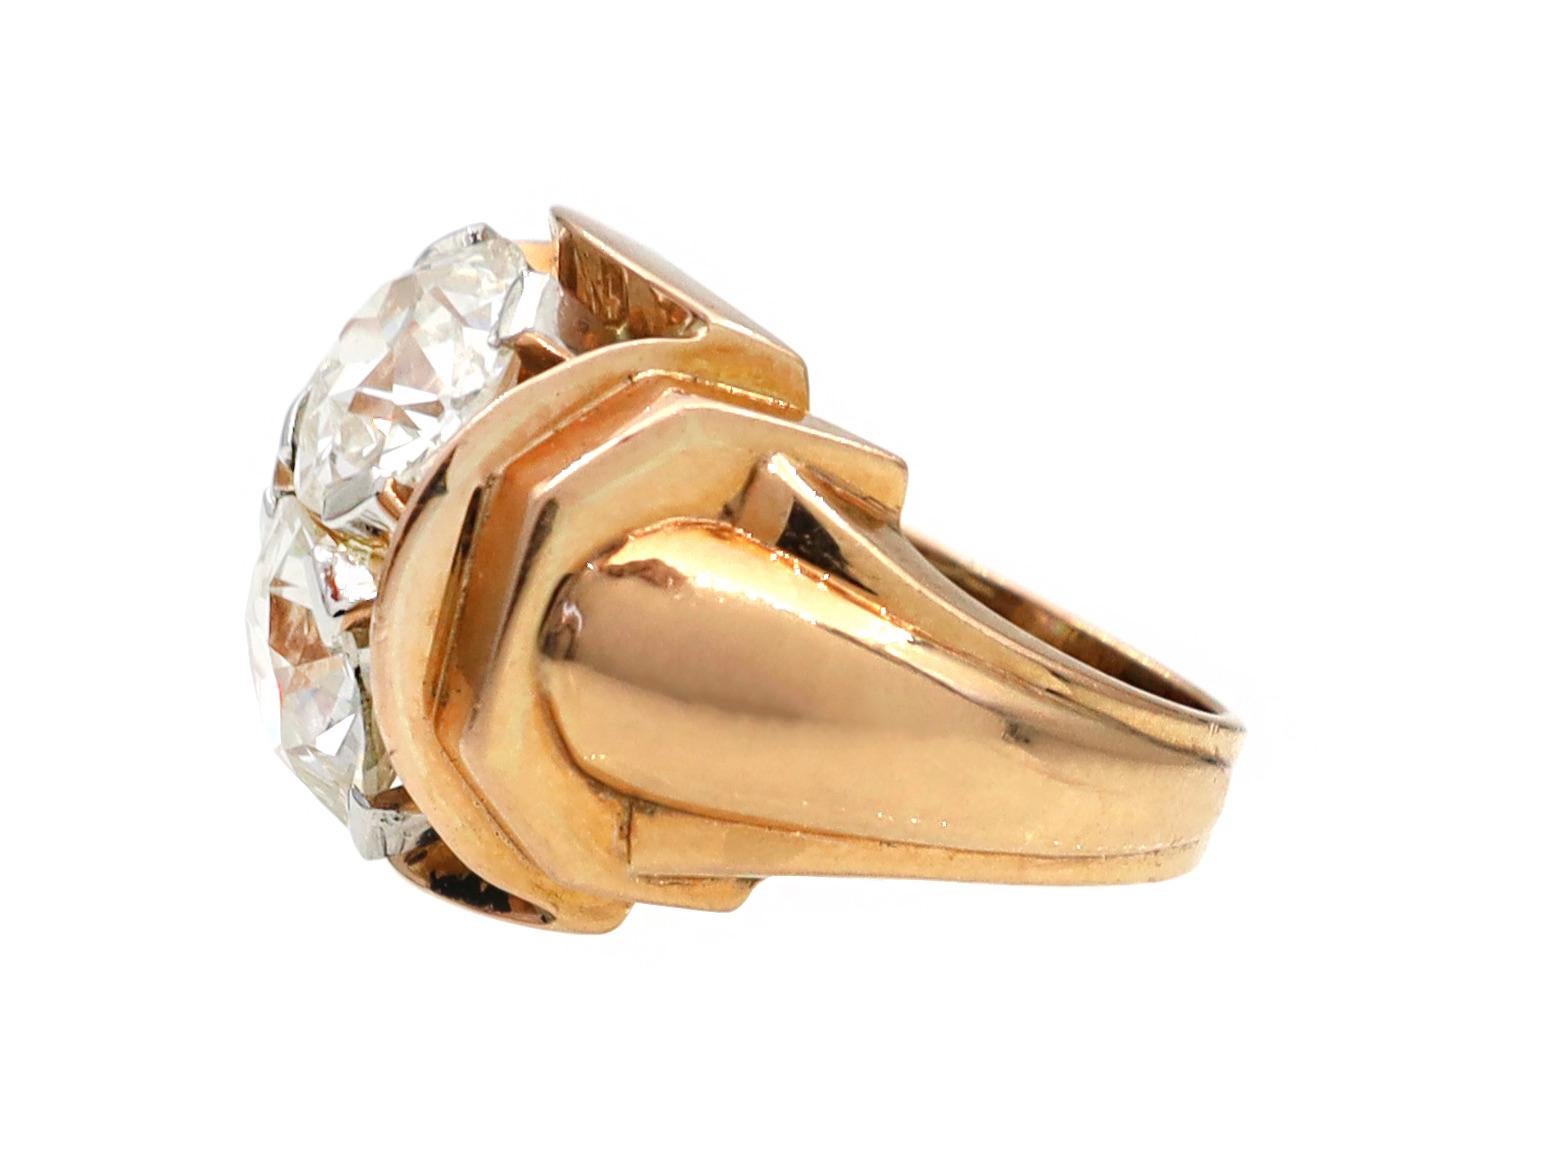 French 1940s two stone tank ring in 18kt yellow gold. Set to top with an estimated 1.45ct round Old European cut diamond in a platinum four claw setting, set beneath with an estimated 1.70ct round Old European cut diamond in a platinum four claw